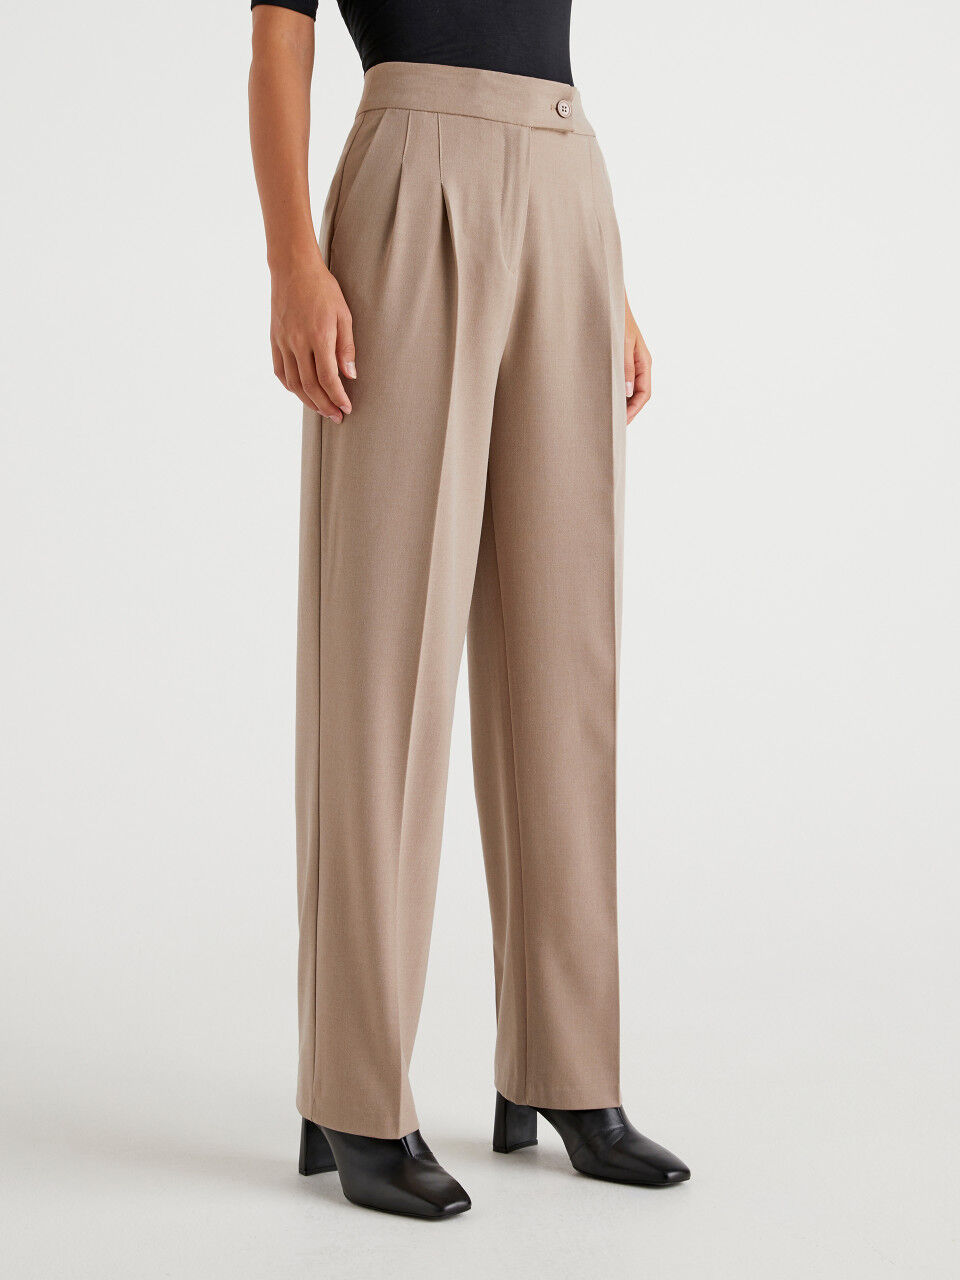 Satin Pleat Detail Relaxed Fit Trousers  boohoo